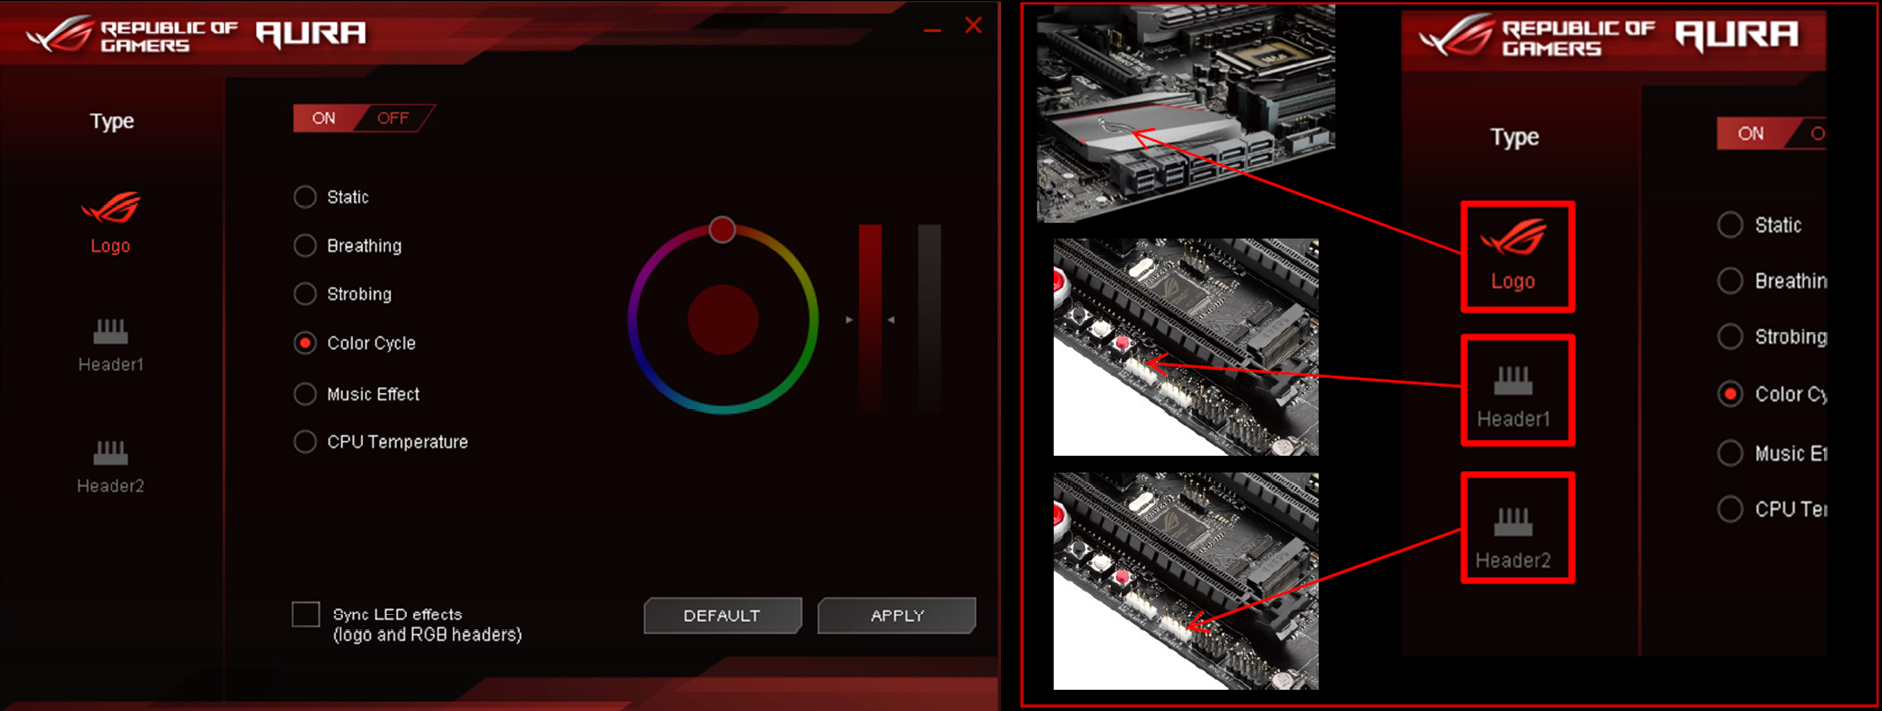 All-New: AURA Lighting Control and RGB Strip Headers | ROG - Republic of  Gamers Global